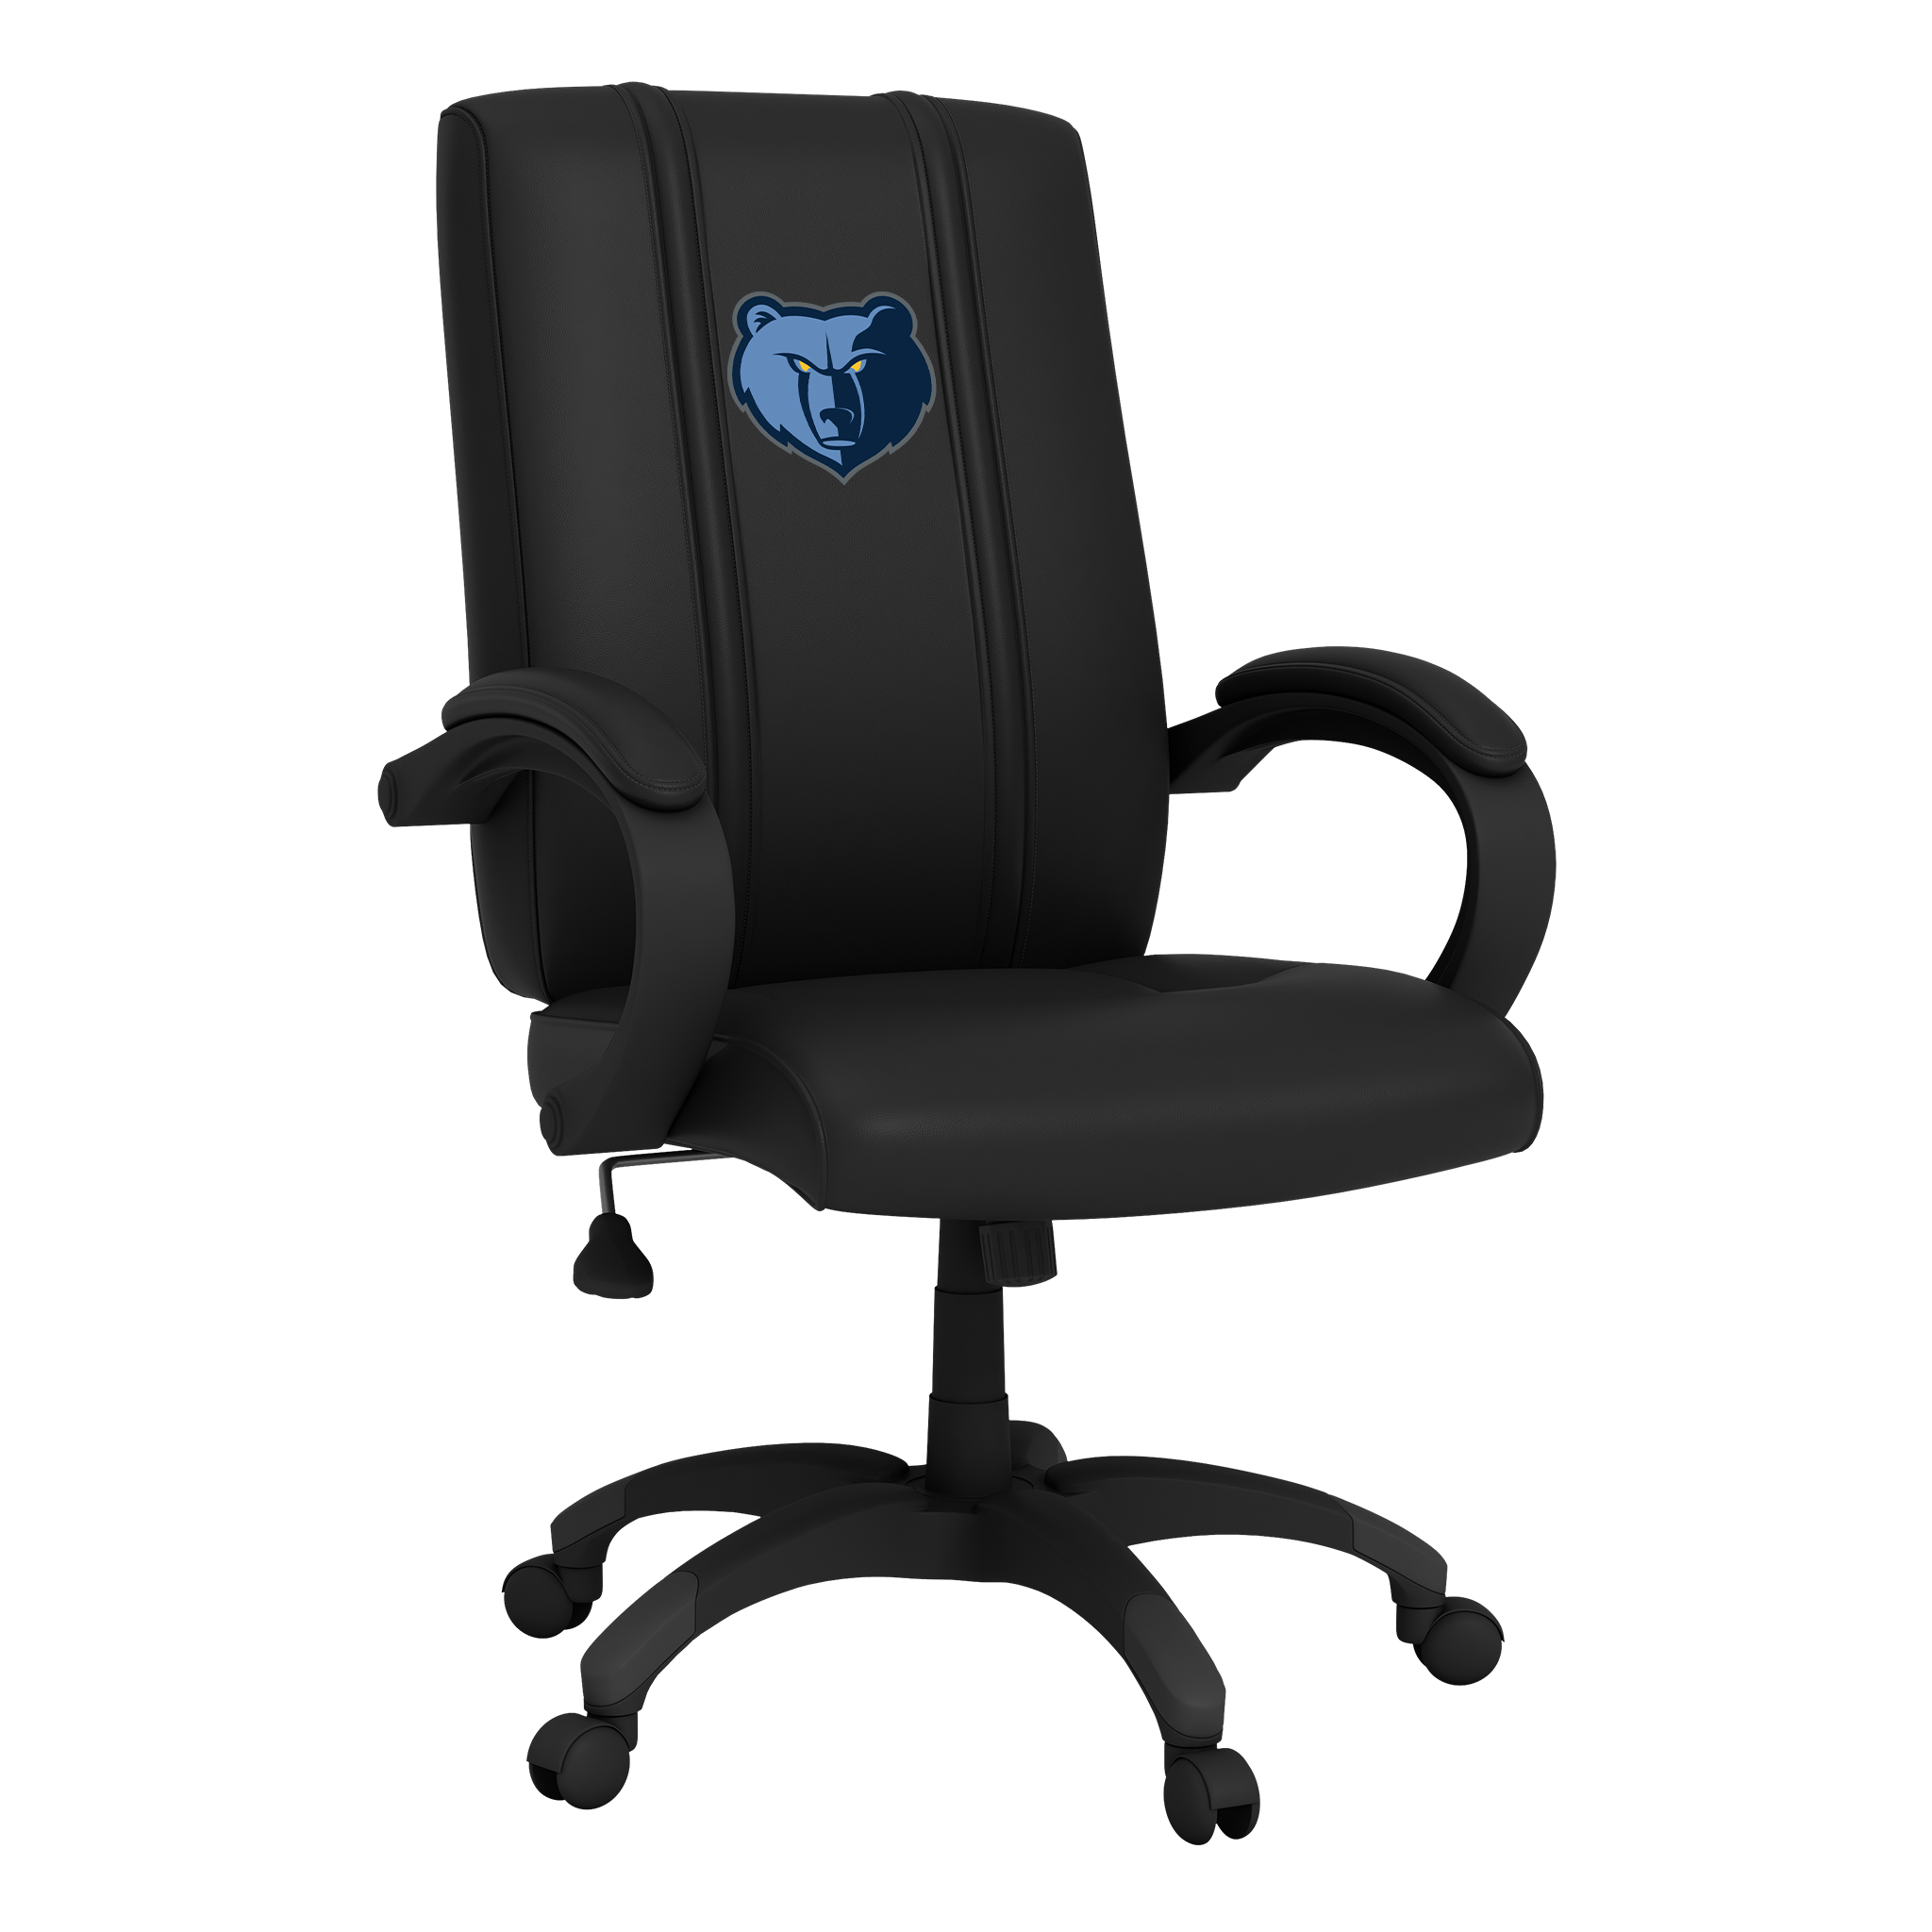 Memphis Grizzlies Office Chair 1000 with Memphis Grizzlies Primary Logo